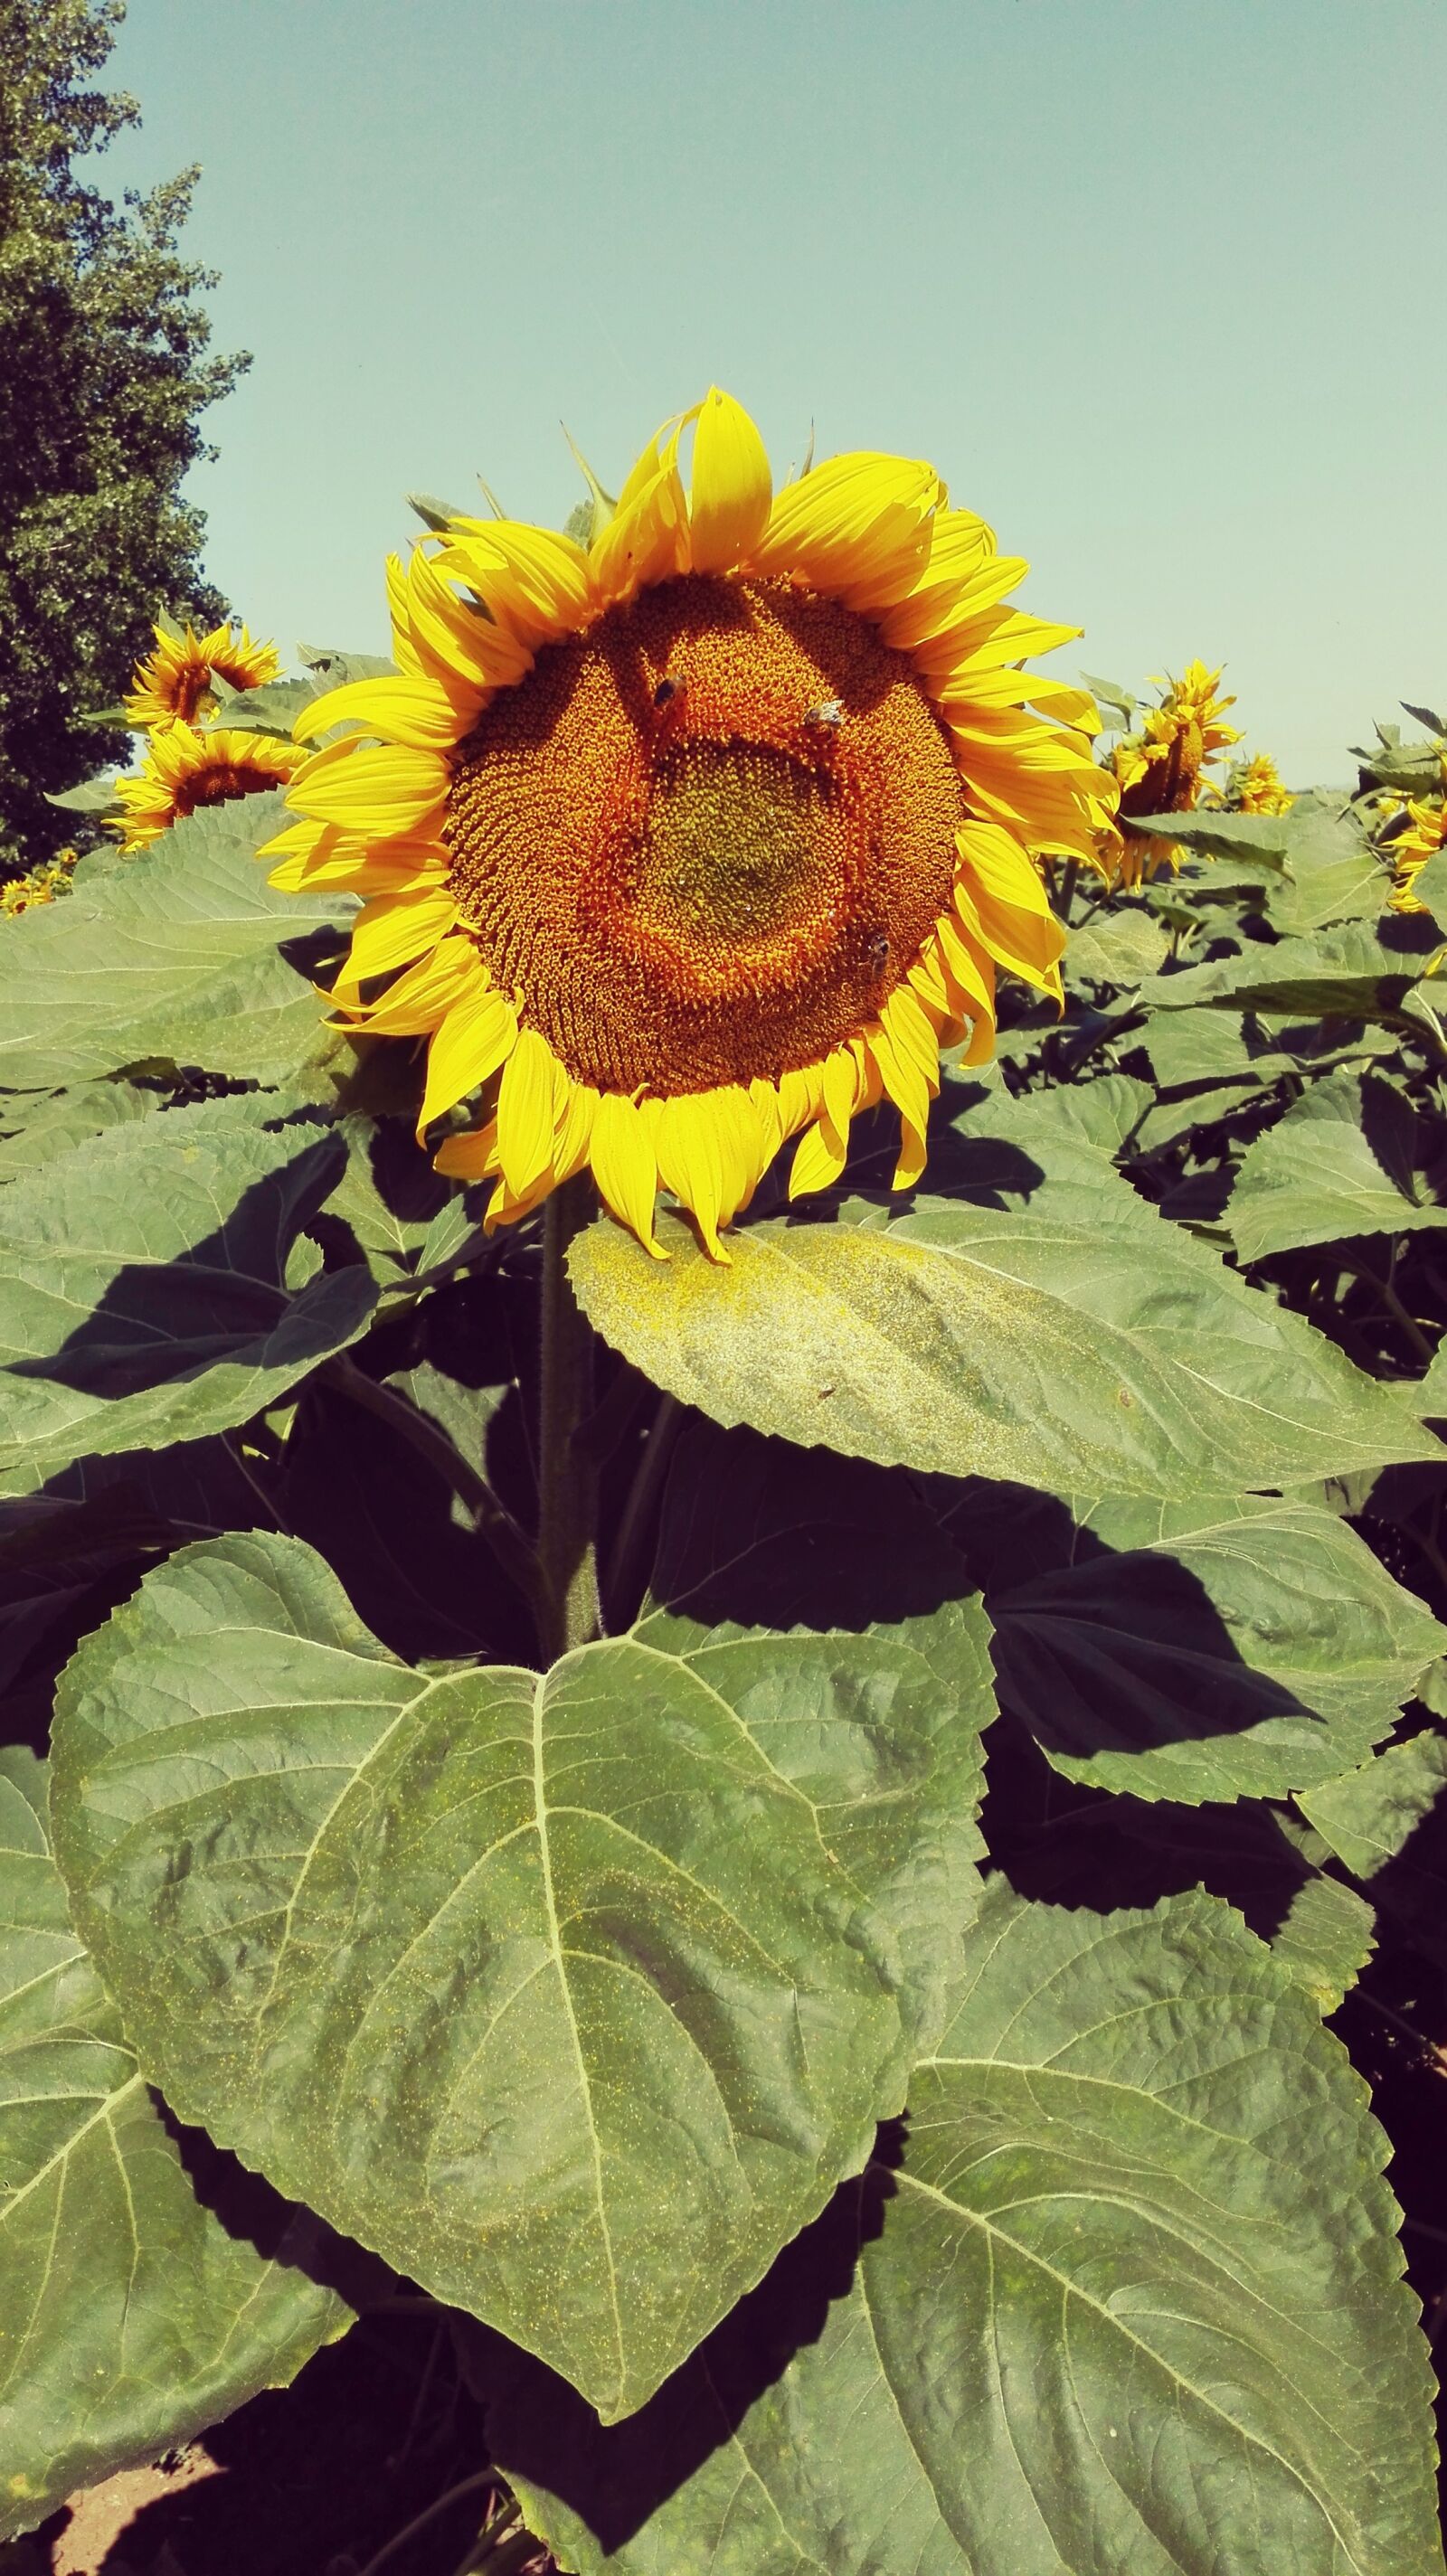 HUAWEI Che2-L11 sample photo. Sunflower, yellow, plant photography